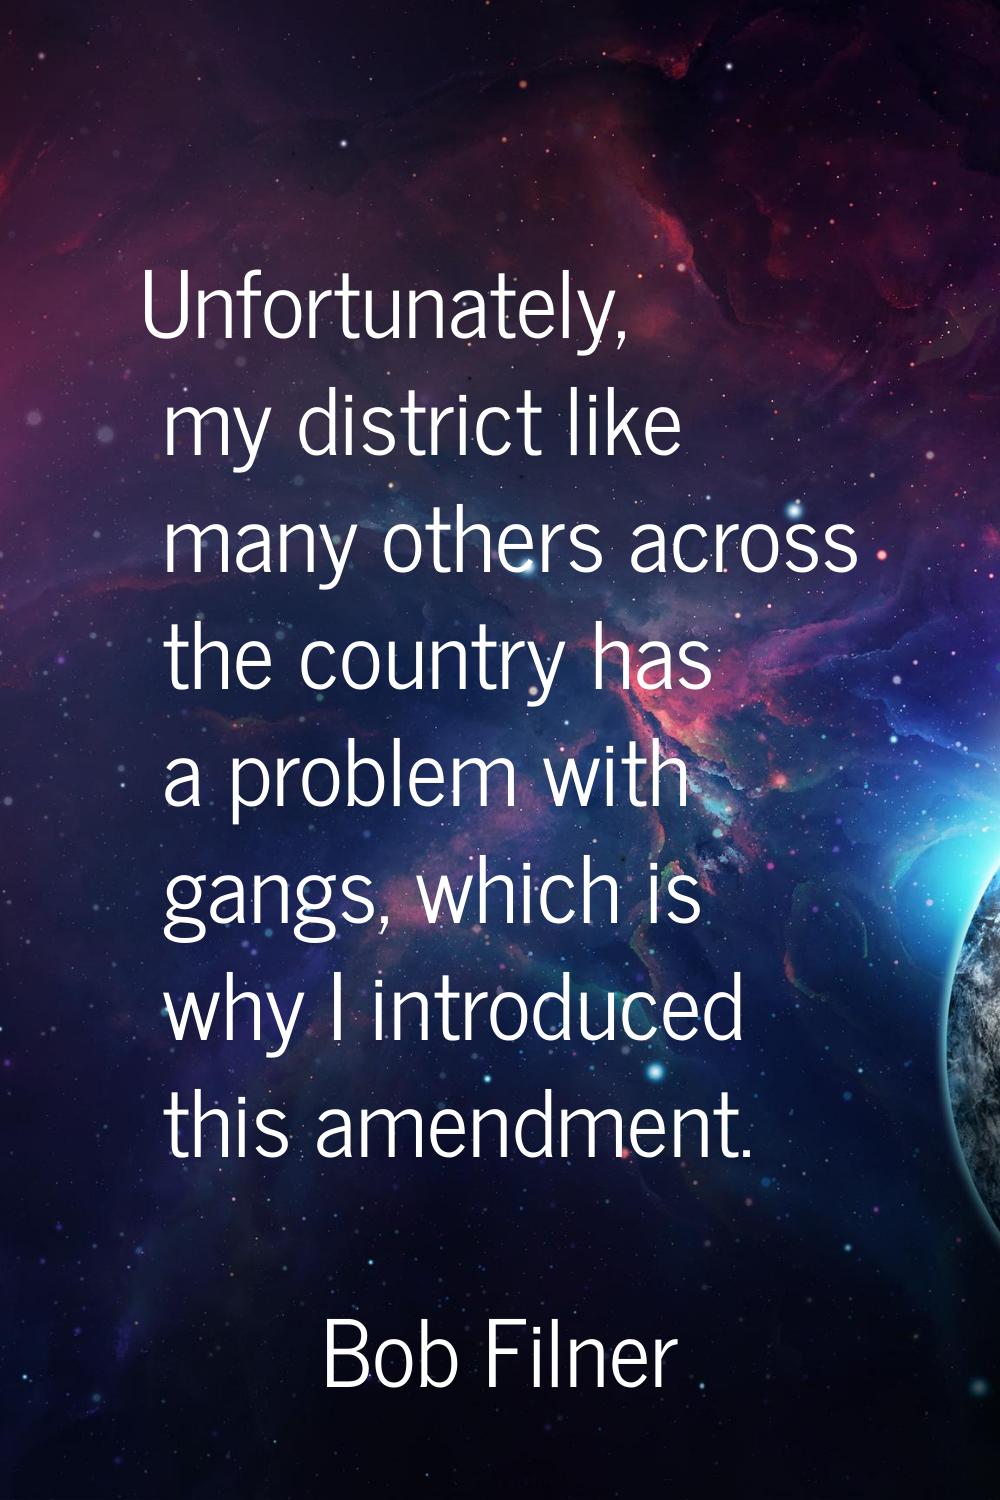 Unfortunately, my district like many others across the country has a problem with gangs, which is w